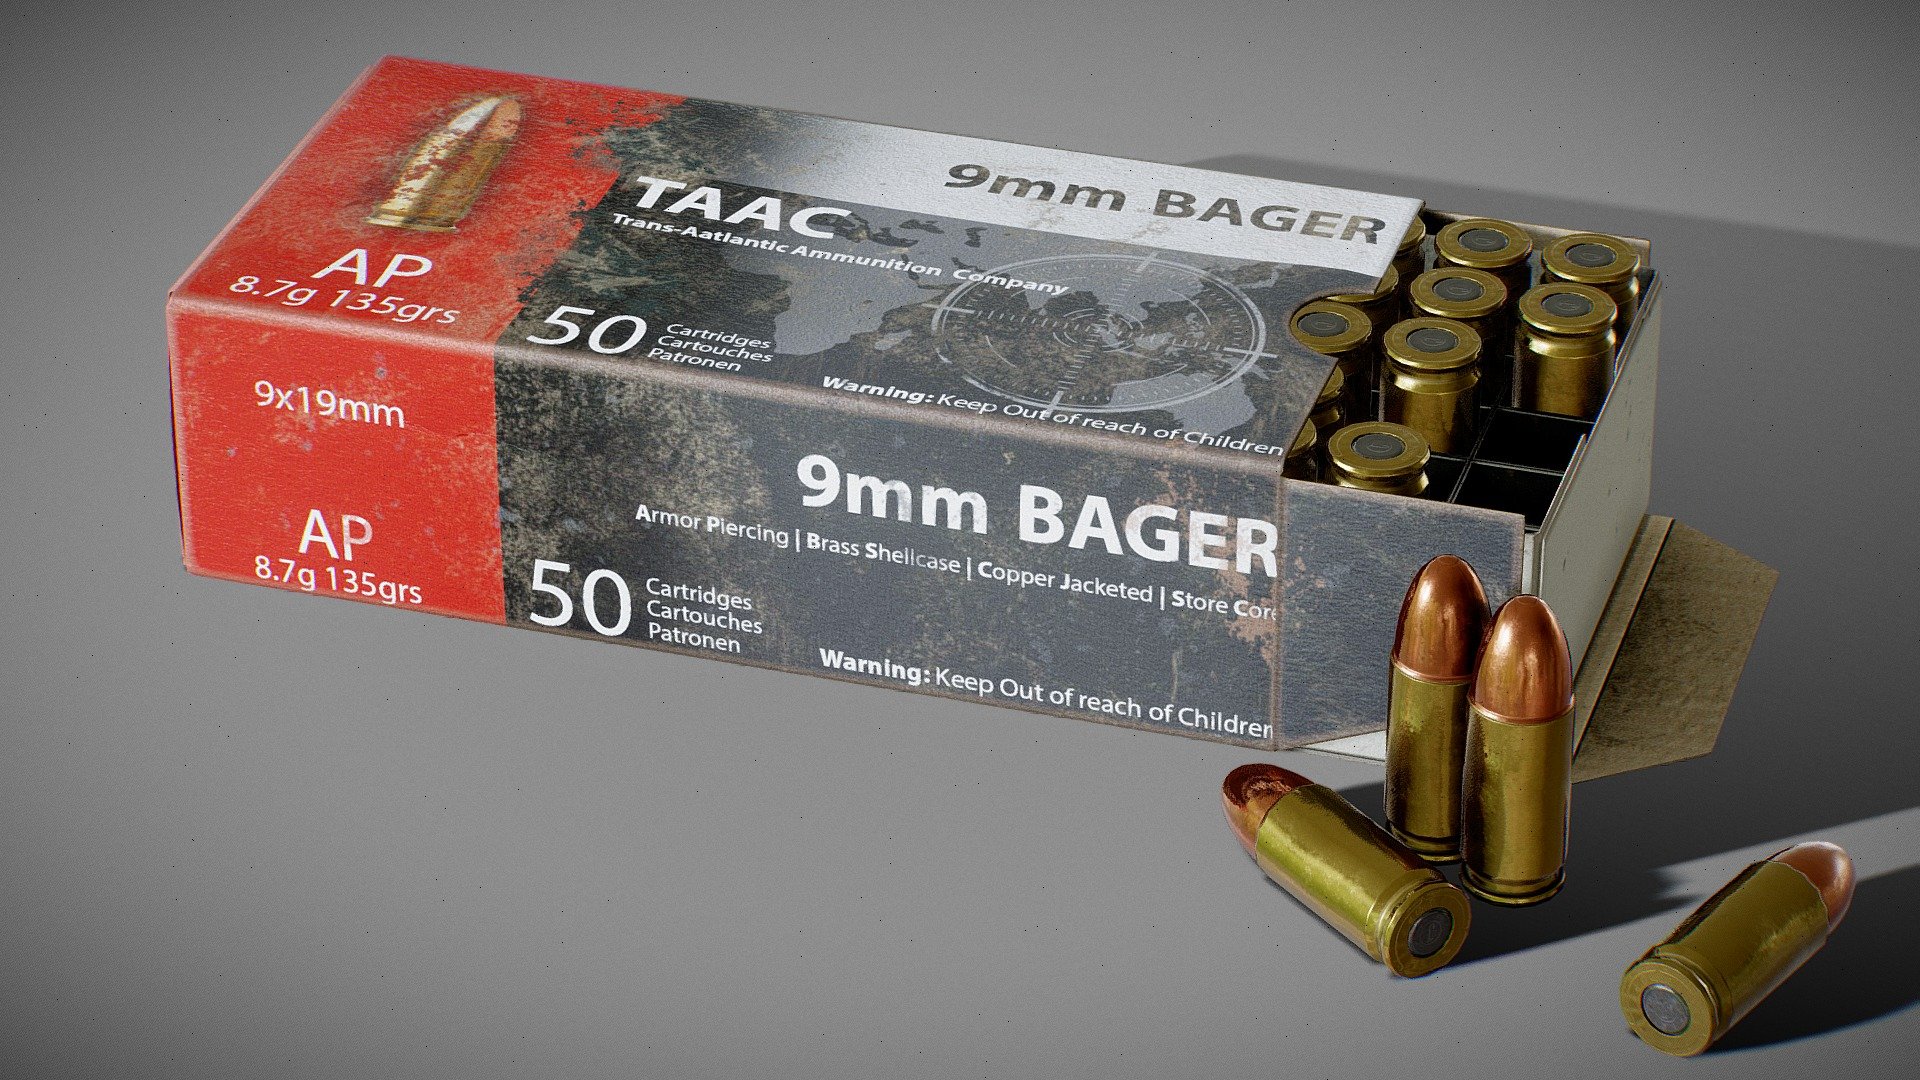 9mm Ammo Box - Handgun Bullets

Professionally modeled realistic Ammo Box. Optimized for games. Everything important about this model is below. I will be happy for any review or comment.





This model is made in blender version 4.0.1




Game-Ready




PBR Texture (Metallic)




4096x4096 png/jpg textures: Albedo, Normal, Ambient Occlusion, Metallic, Roughness maps



Note: In the additional files you have all the textures with the FBX model, I also added the IDs to the files for your own customization if you want to change anything.

Polycount:





Box It self - 1,198 Tris.




Single Bullet - 652 Tris.




Paper Holder Inside Box - 412 Tris.




Metal Iron Bullet Holder - 988 Tris.



Others:

You can check out these latest released models:




Chainsaw - Homelite 26 LCS

Survival Horror Pack
 - 9mm Old Damaged Ammo Box - Buy Royalty Free 3D model by Jakub (@jakub.iv) 3d model